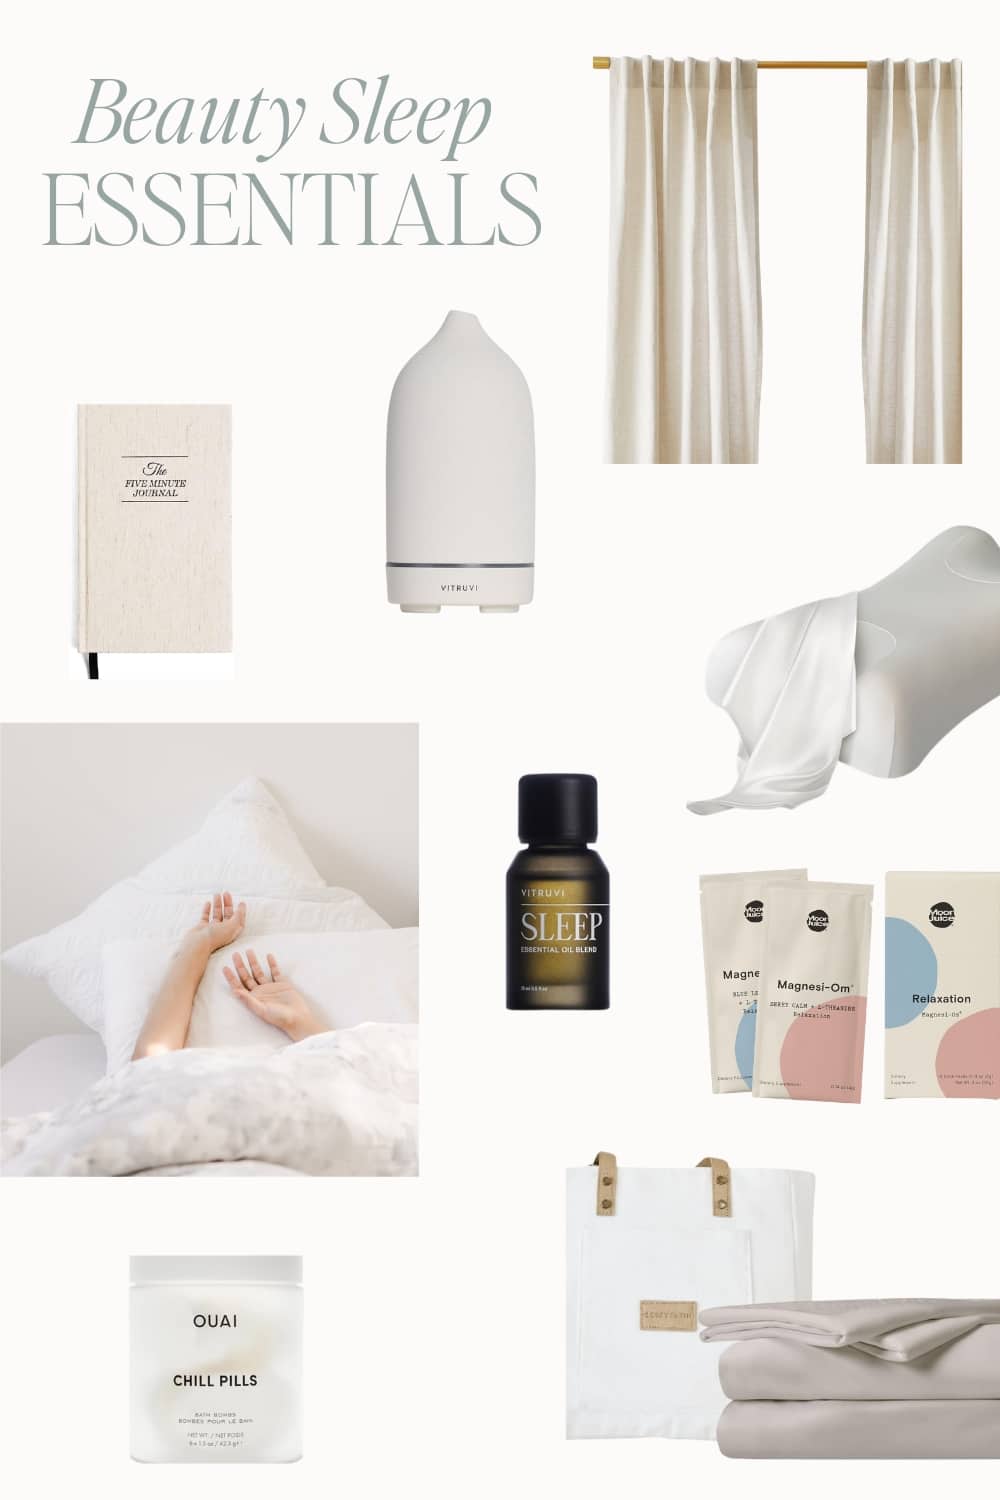 Collage of beauty sleep essentials including blackout curtains, a Vitruvi diffuser, The Five Minute Journal, silk pillowcases, Vitruvi Sleep essential oil blend, Moon Juice Magnesi-Om supplements, Ouai Chill Pills, and luxurious bedding.